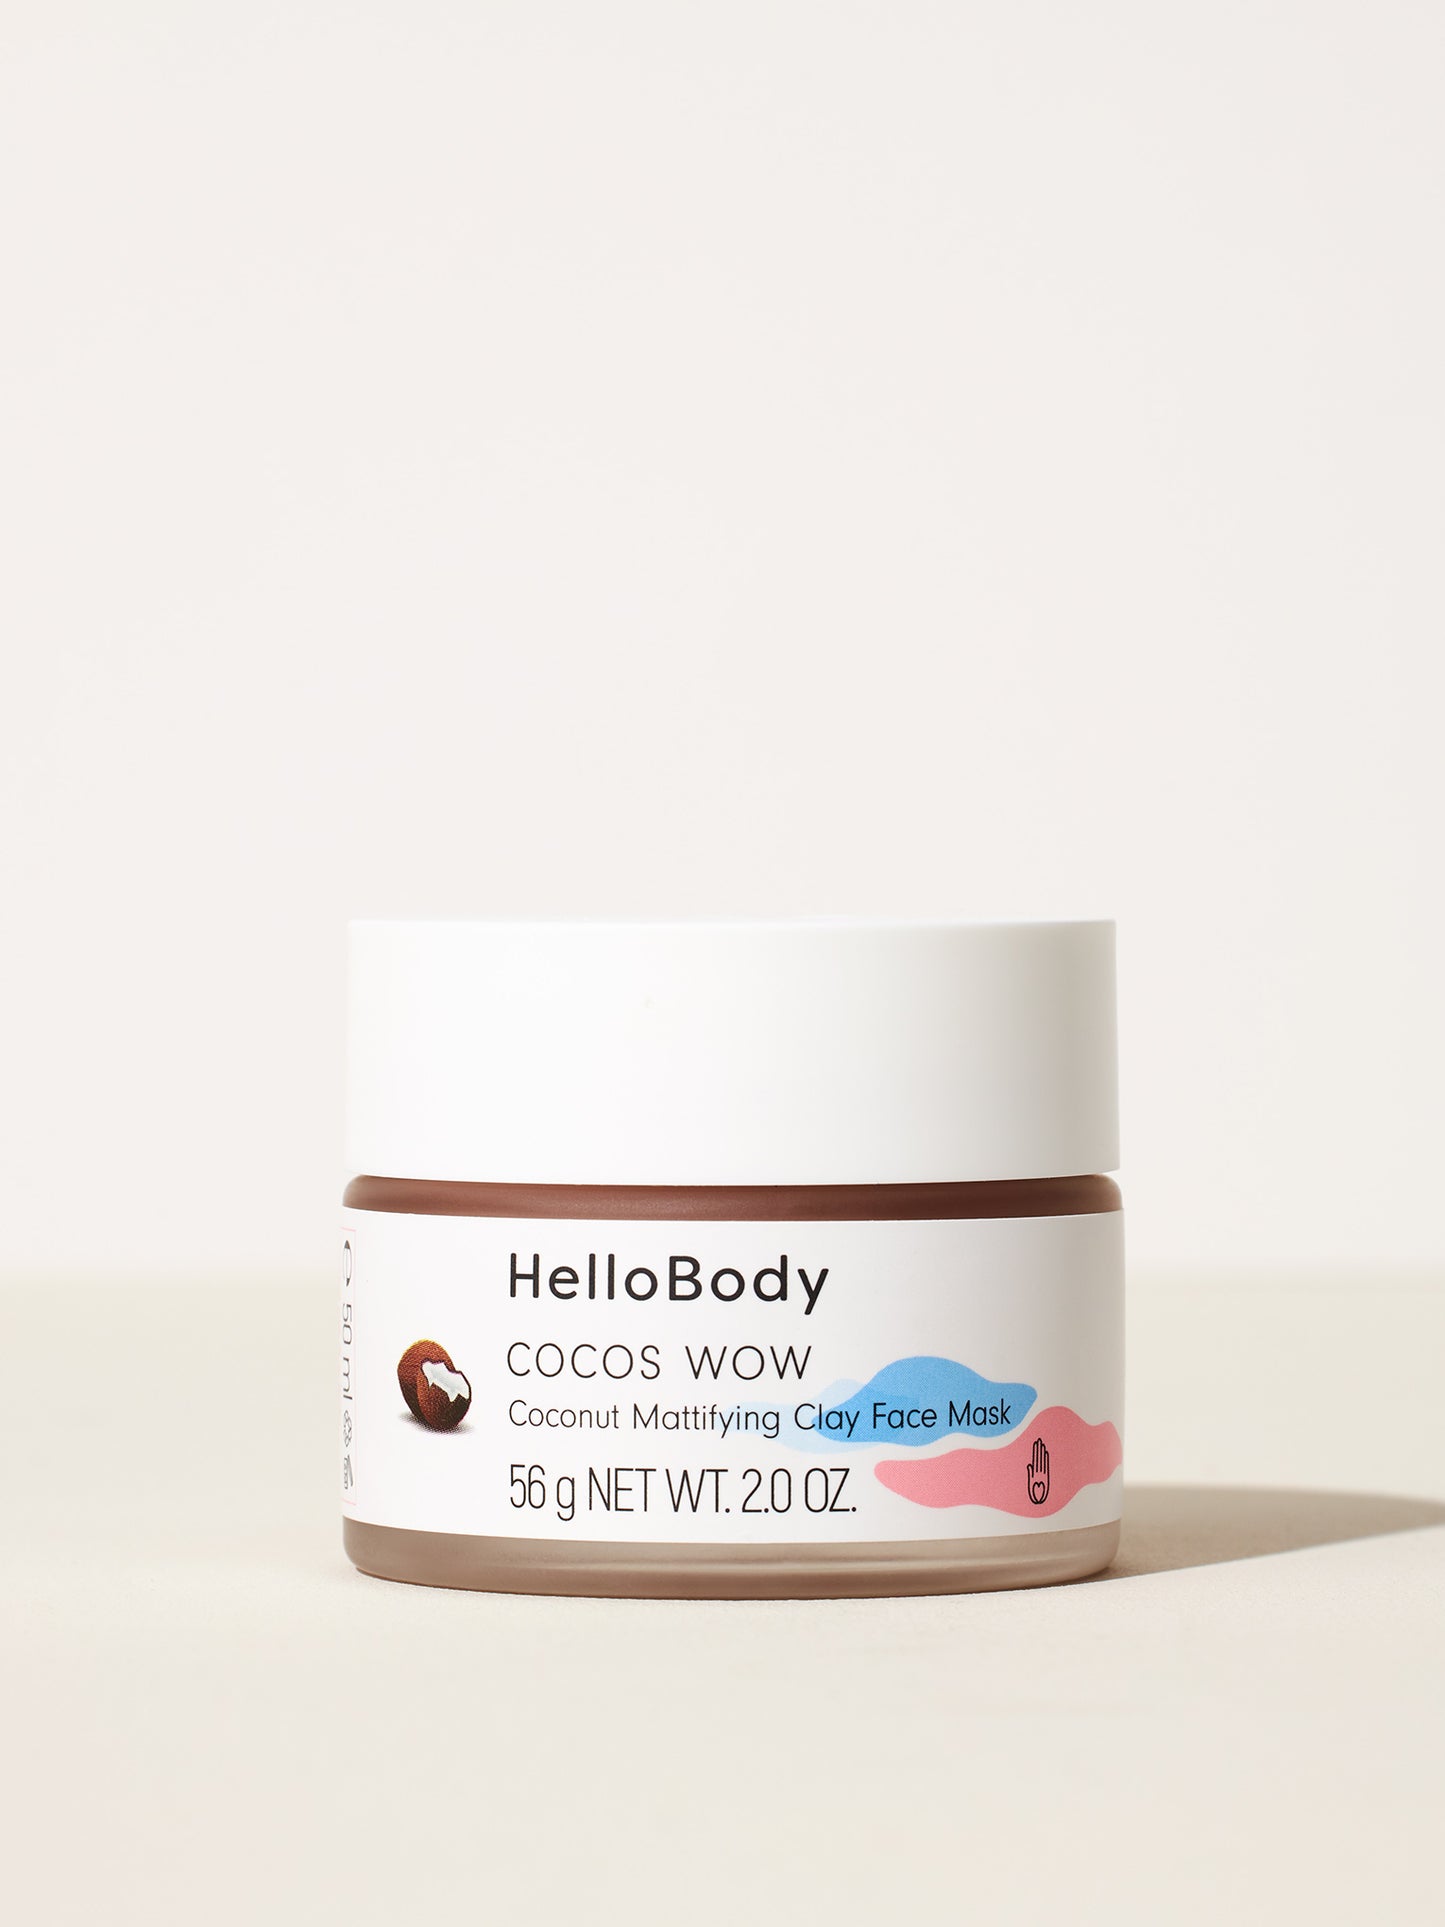 COCOS FRESH Mousse visage nettoyante  HelloBody – HelloBody - Less is More  Skin FR